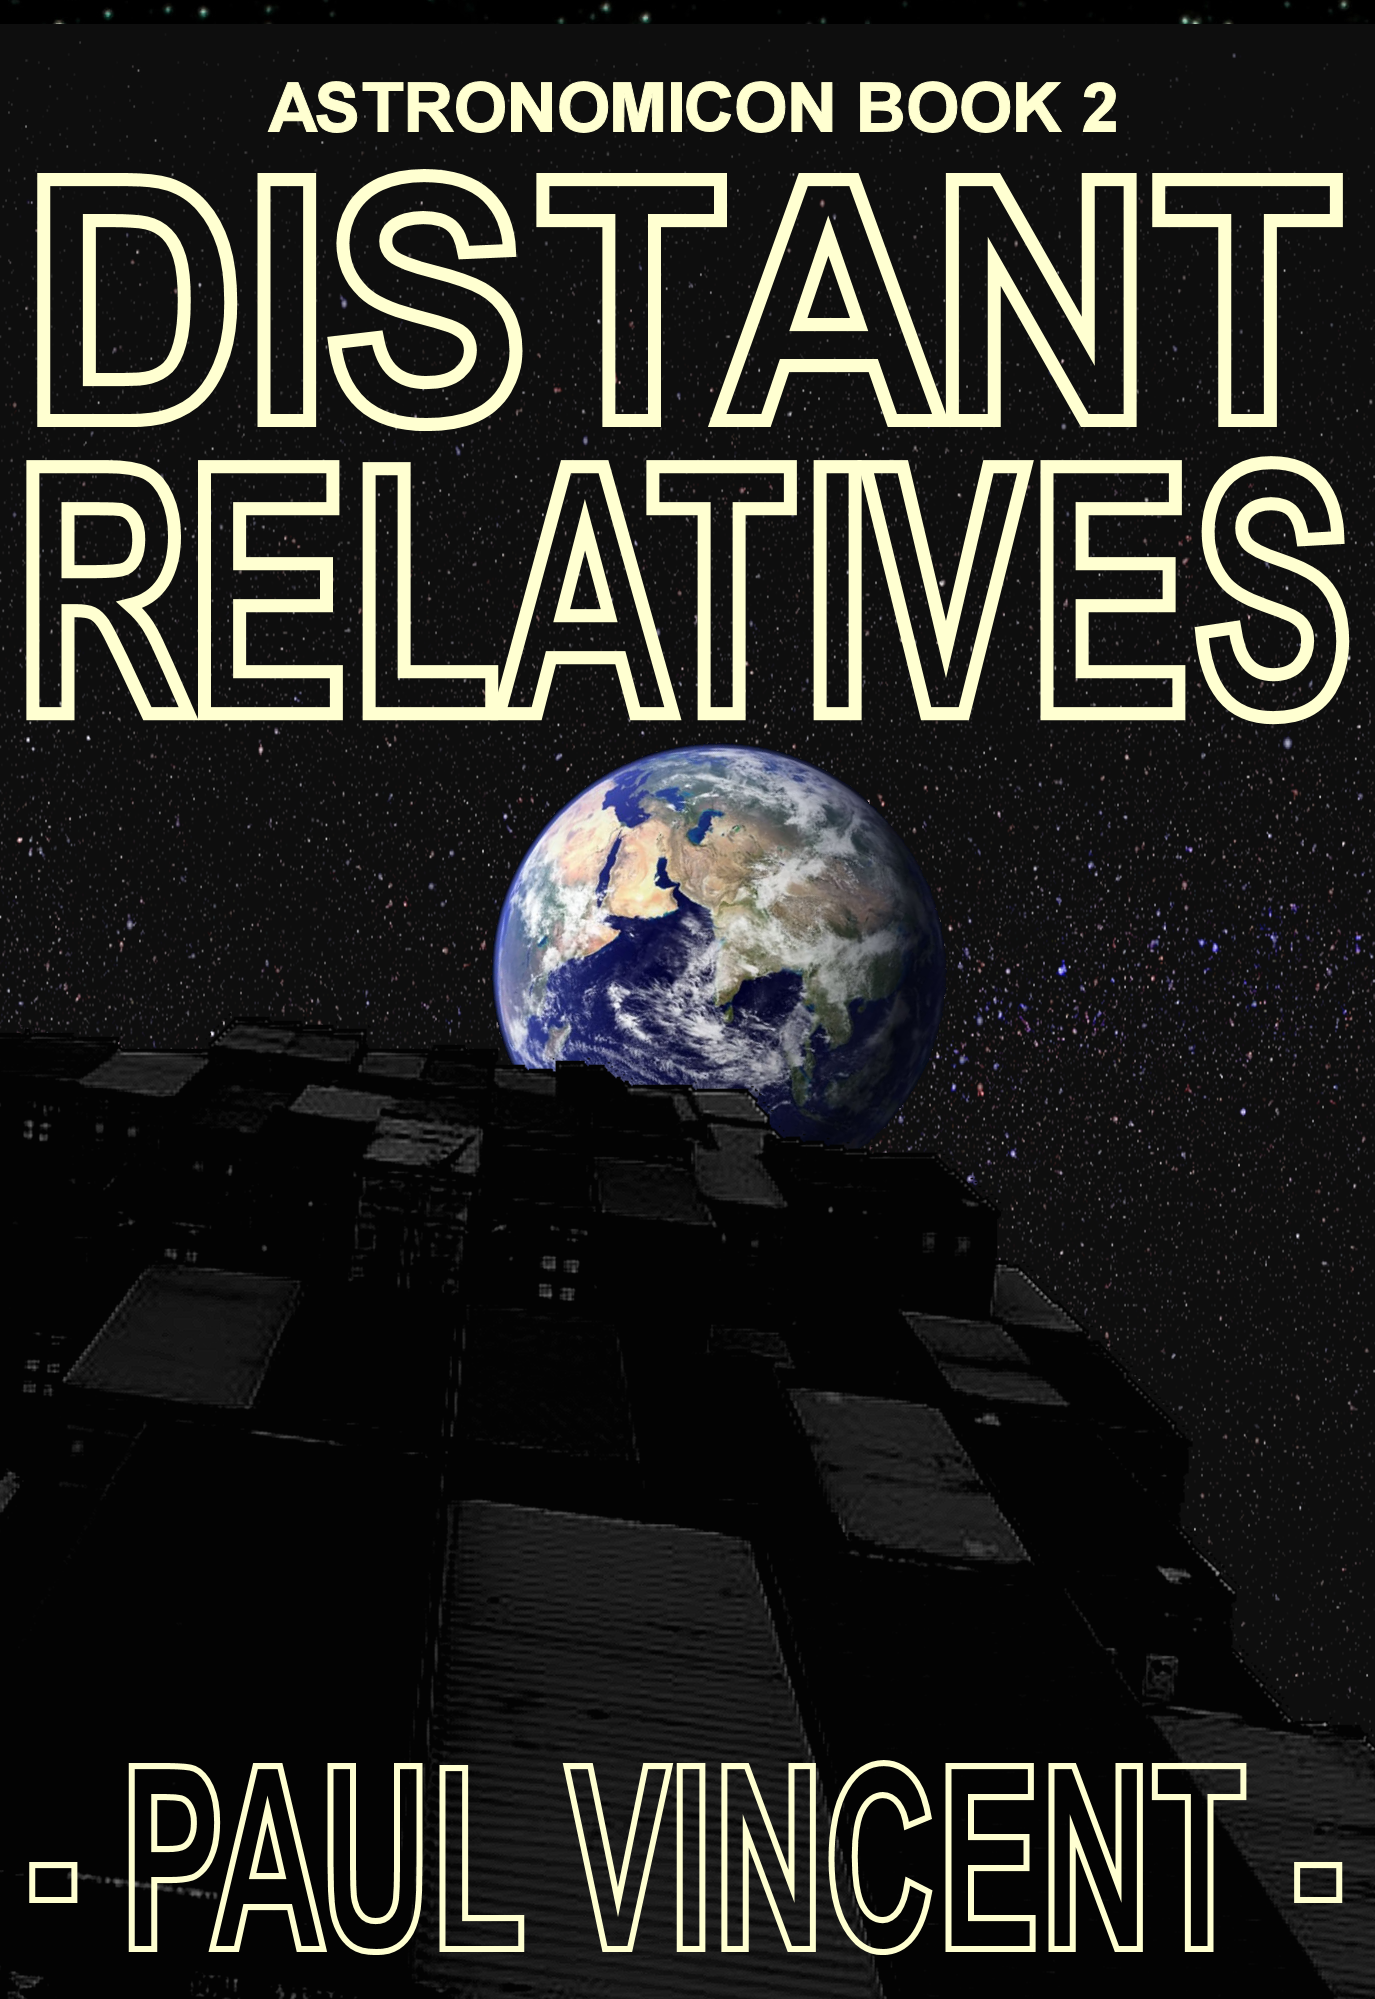 Another Cover Reveal #SciFi